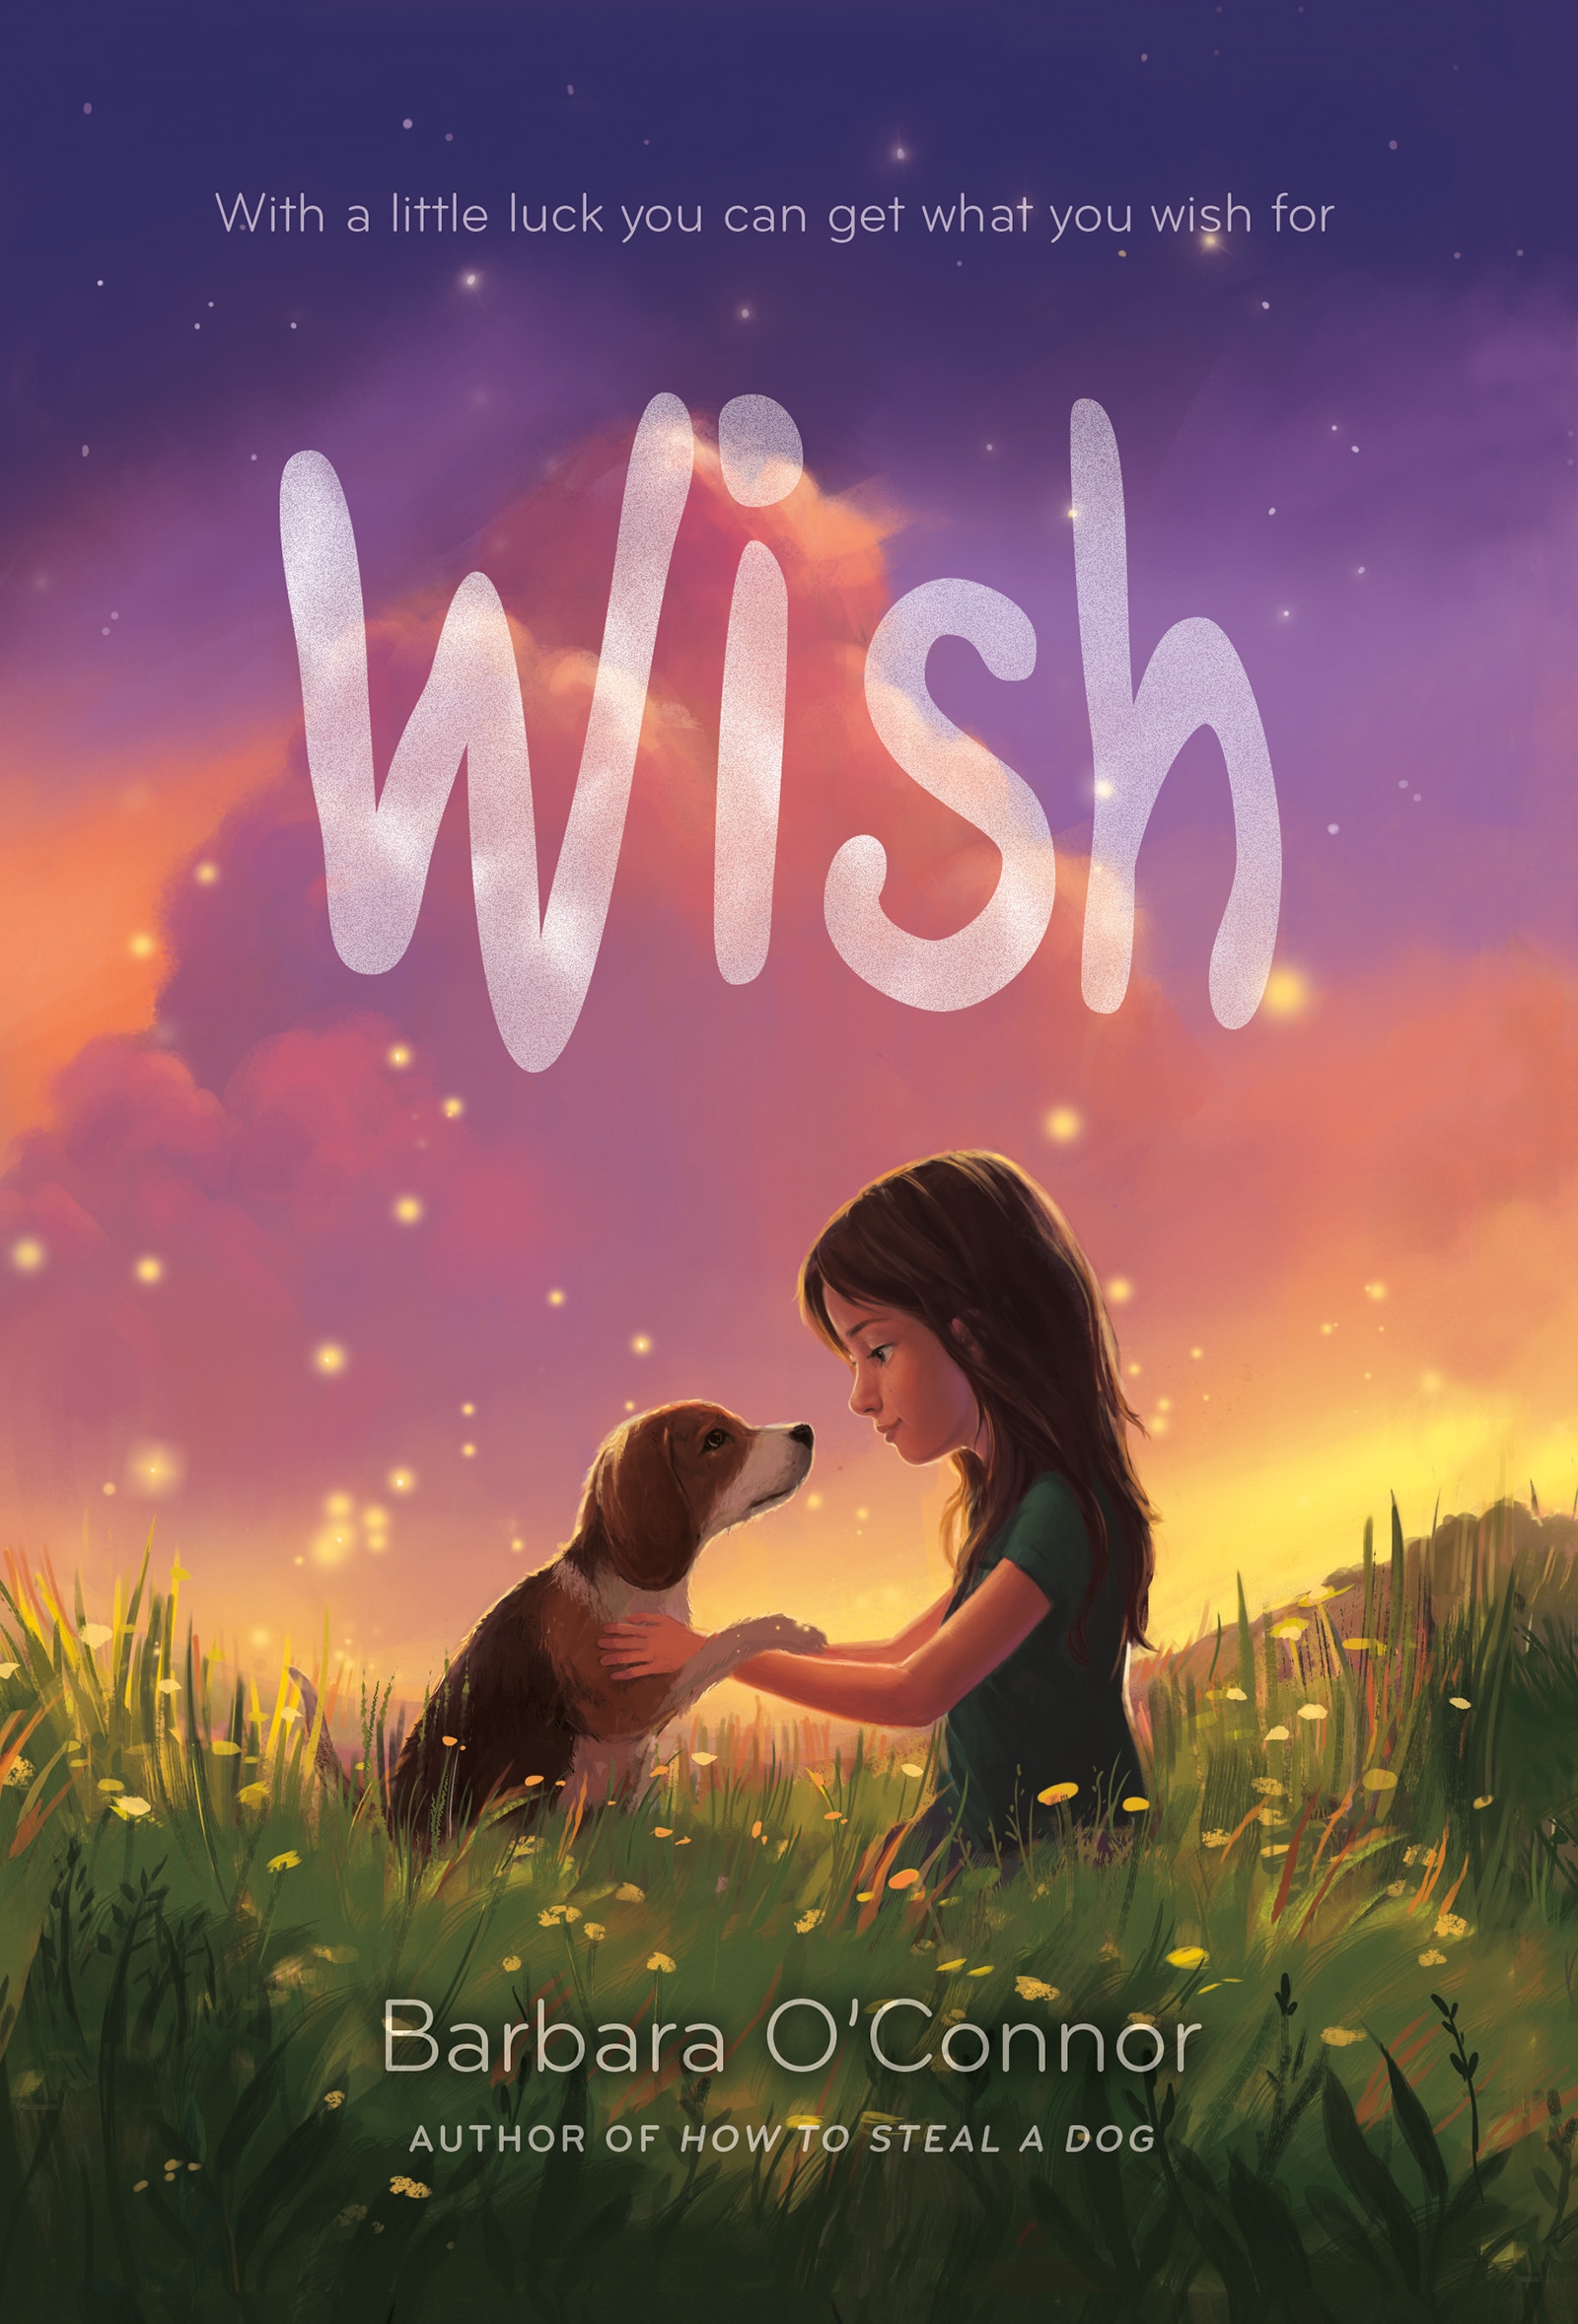 Wish cover image